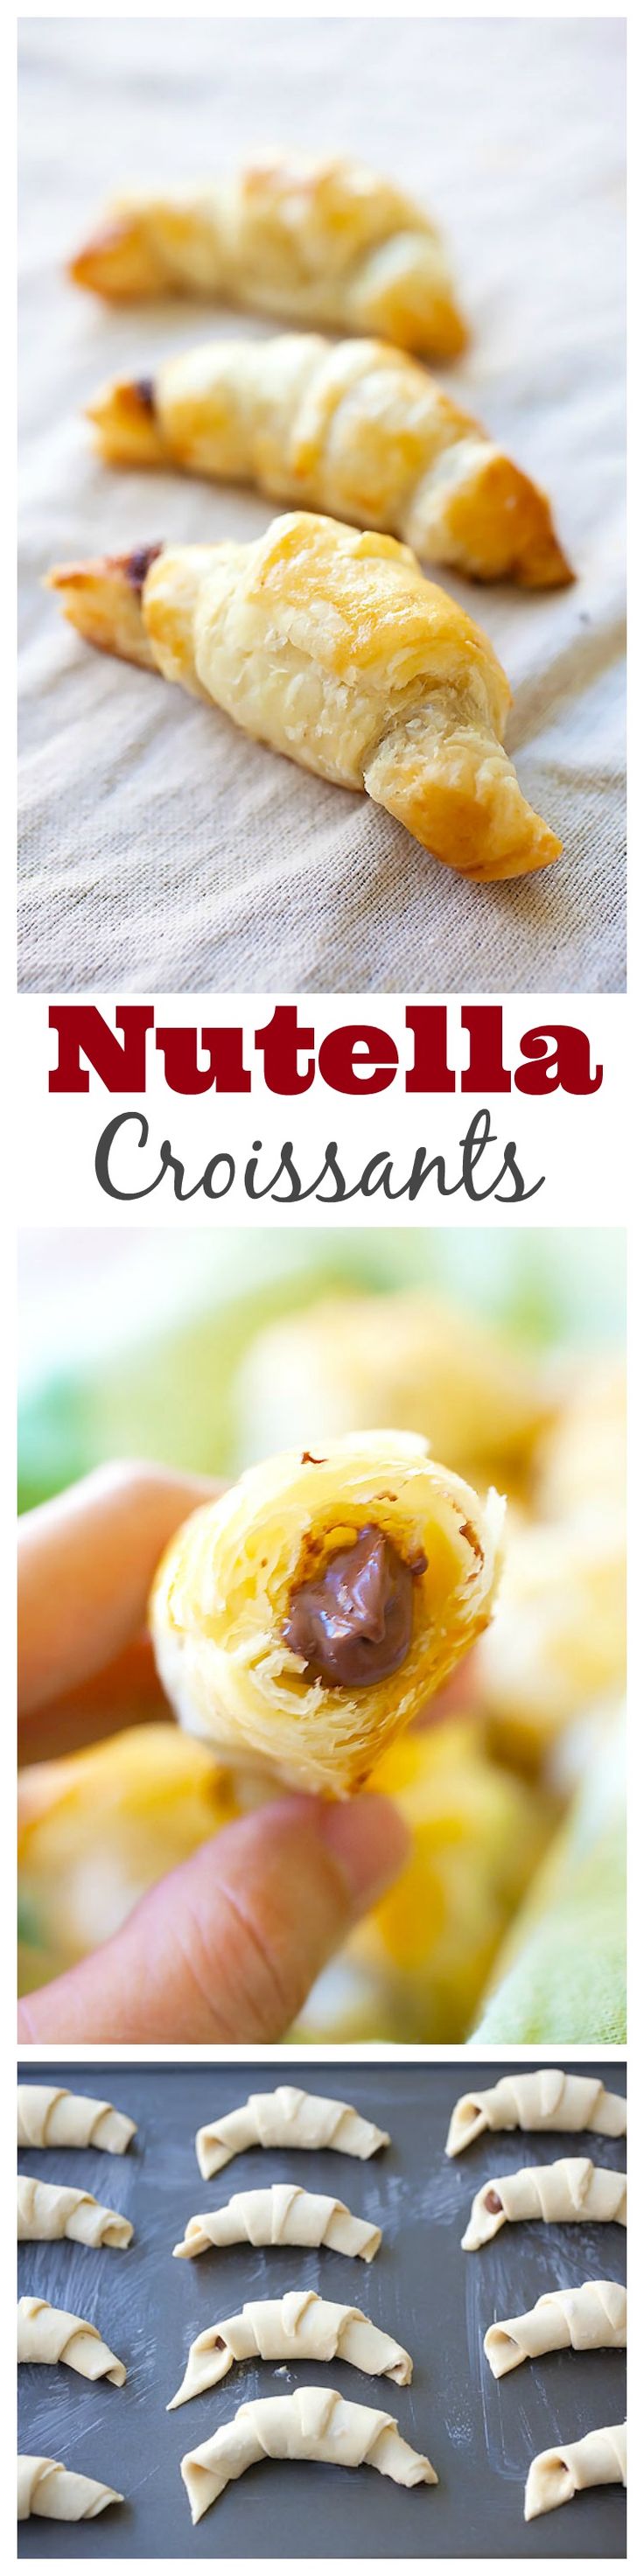 Nutella Croissants – 3-ingredient recipe loaded with rich, creamy Nutella in flaky and buttery croissants. Easiest and BEST Nutella croissants ever | rasamalaysia.com